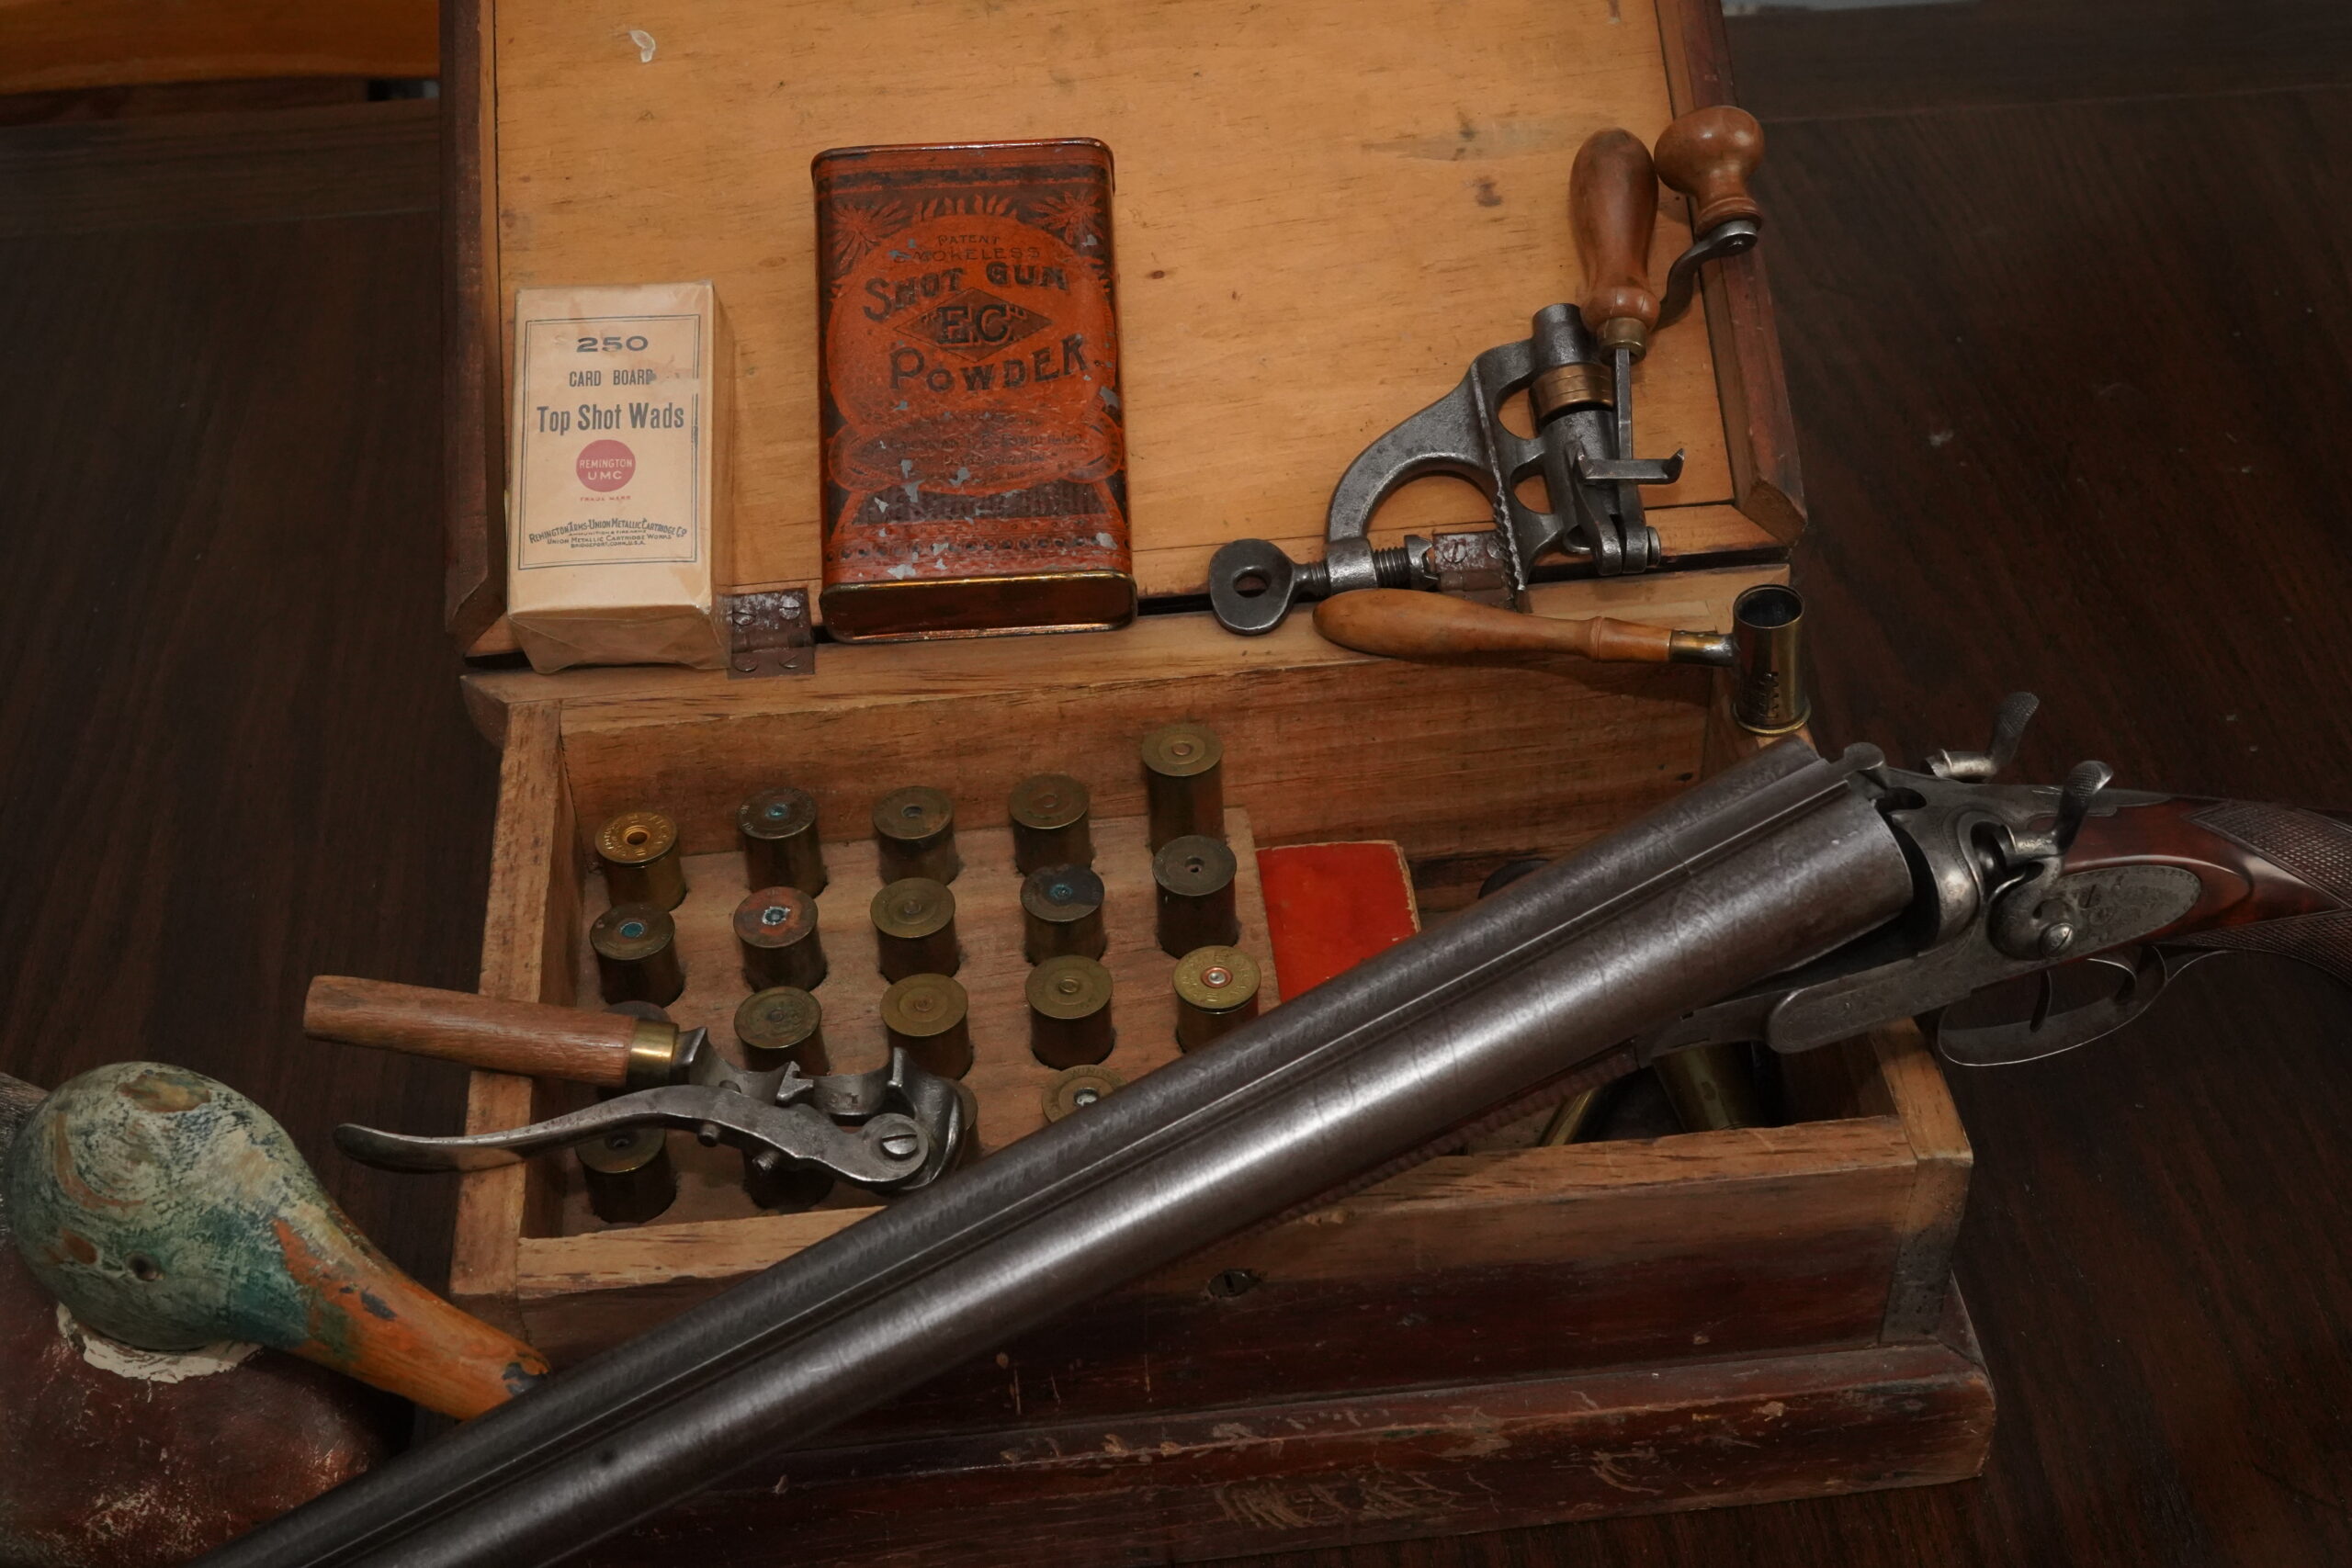 Gunnving boxes were equipped with reloading supplies.